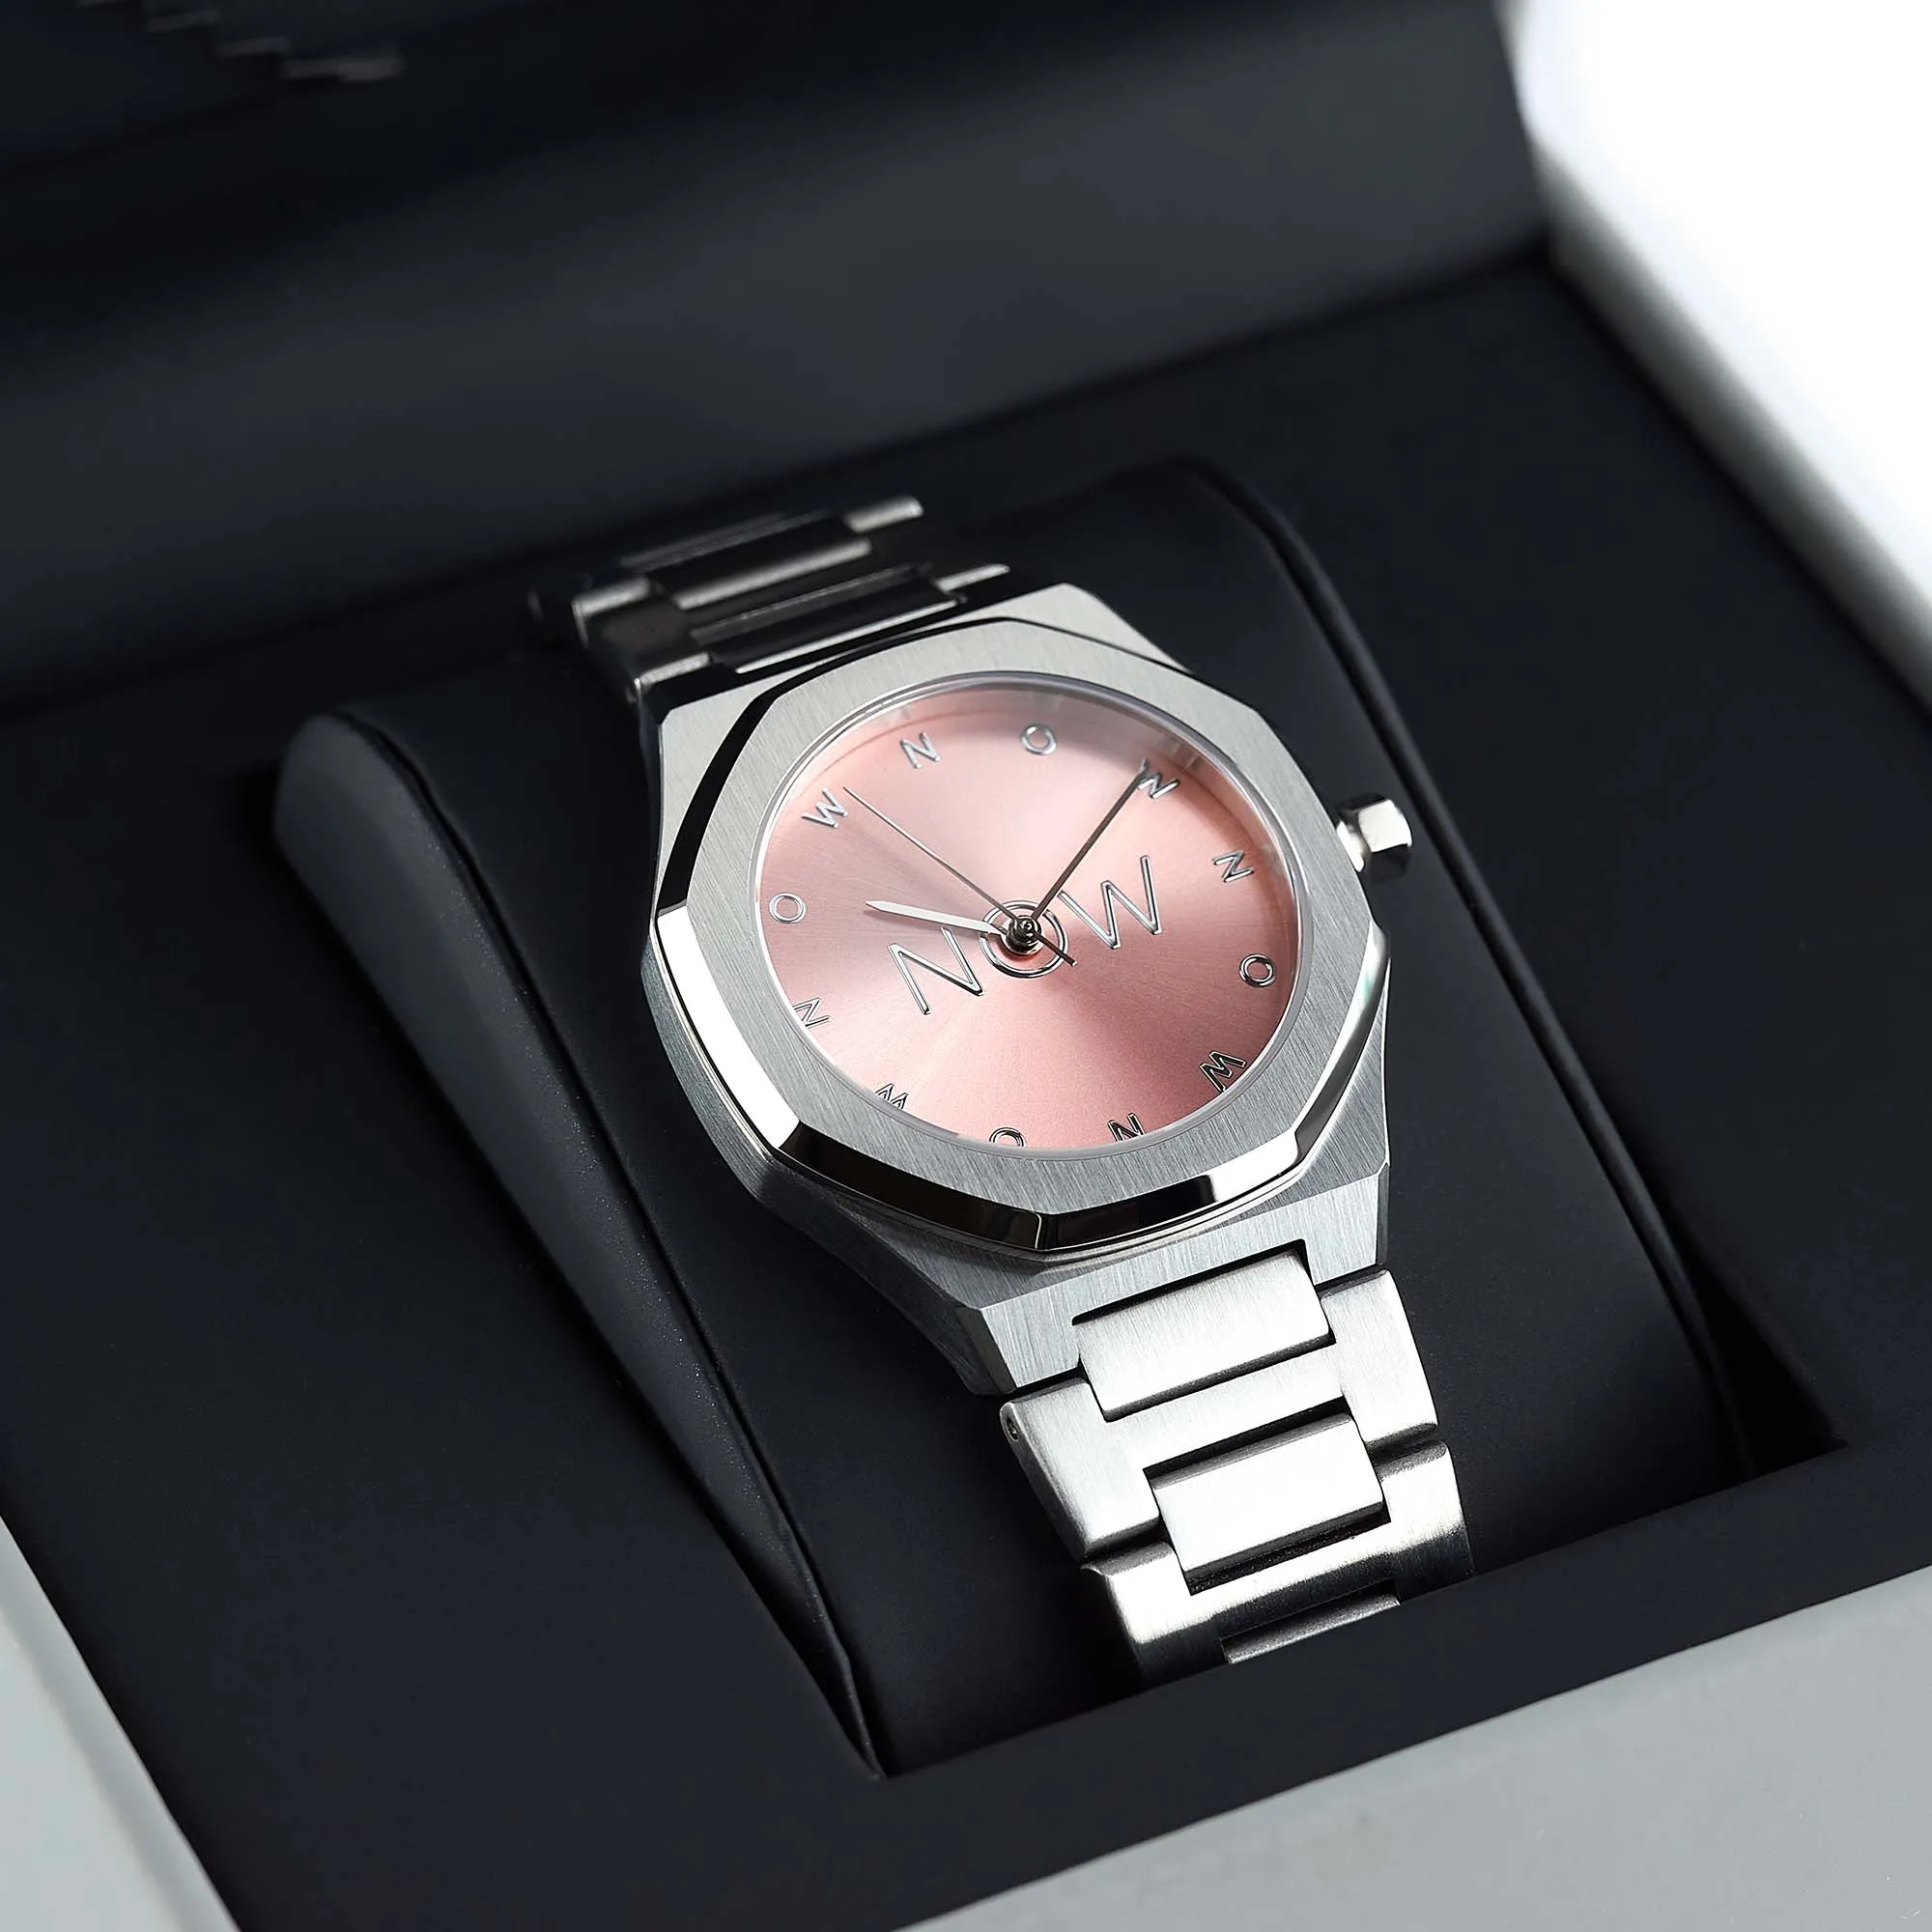 NOW Watch - stainless steel - women's